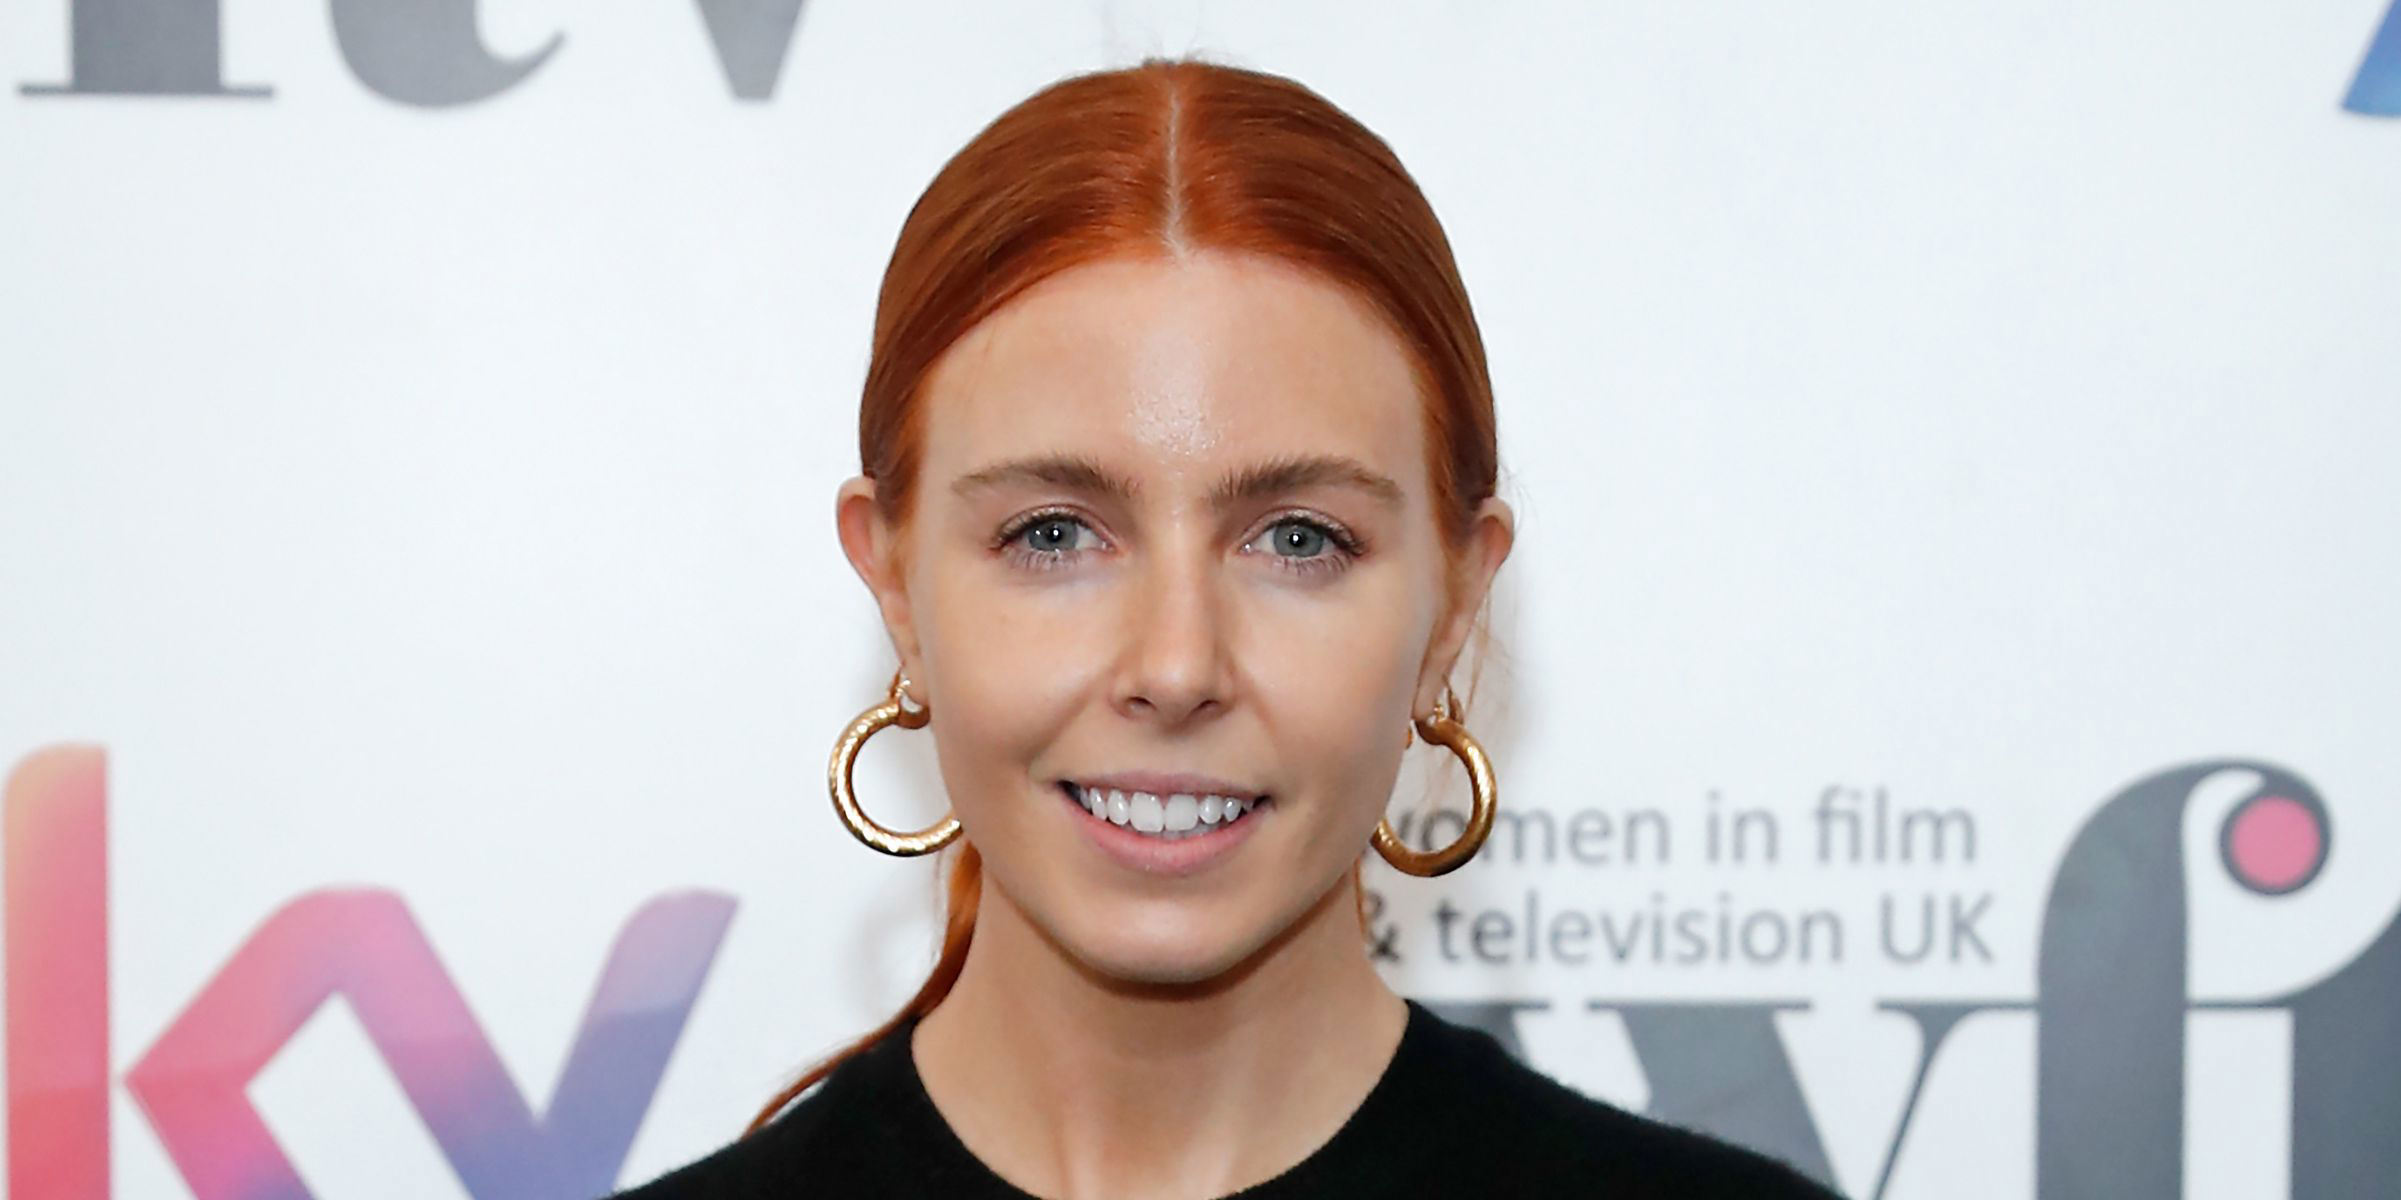 Stacey Dooley shares adorable new photo cradling her baby daughter, Minnie